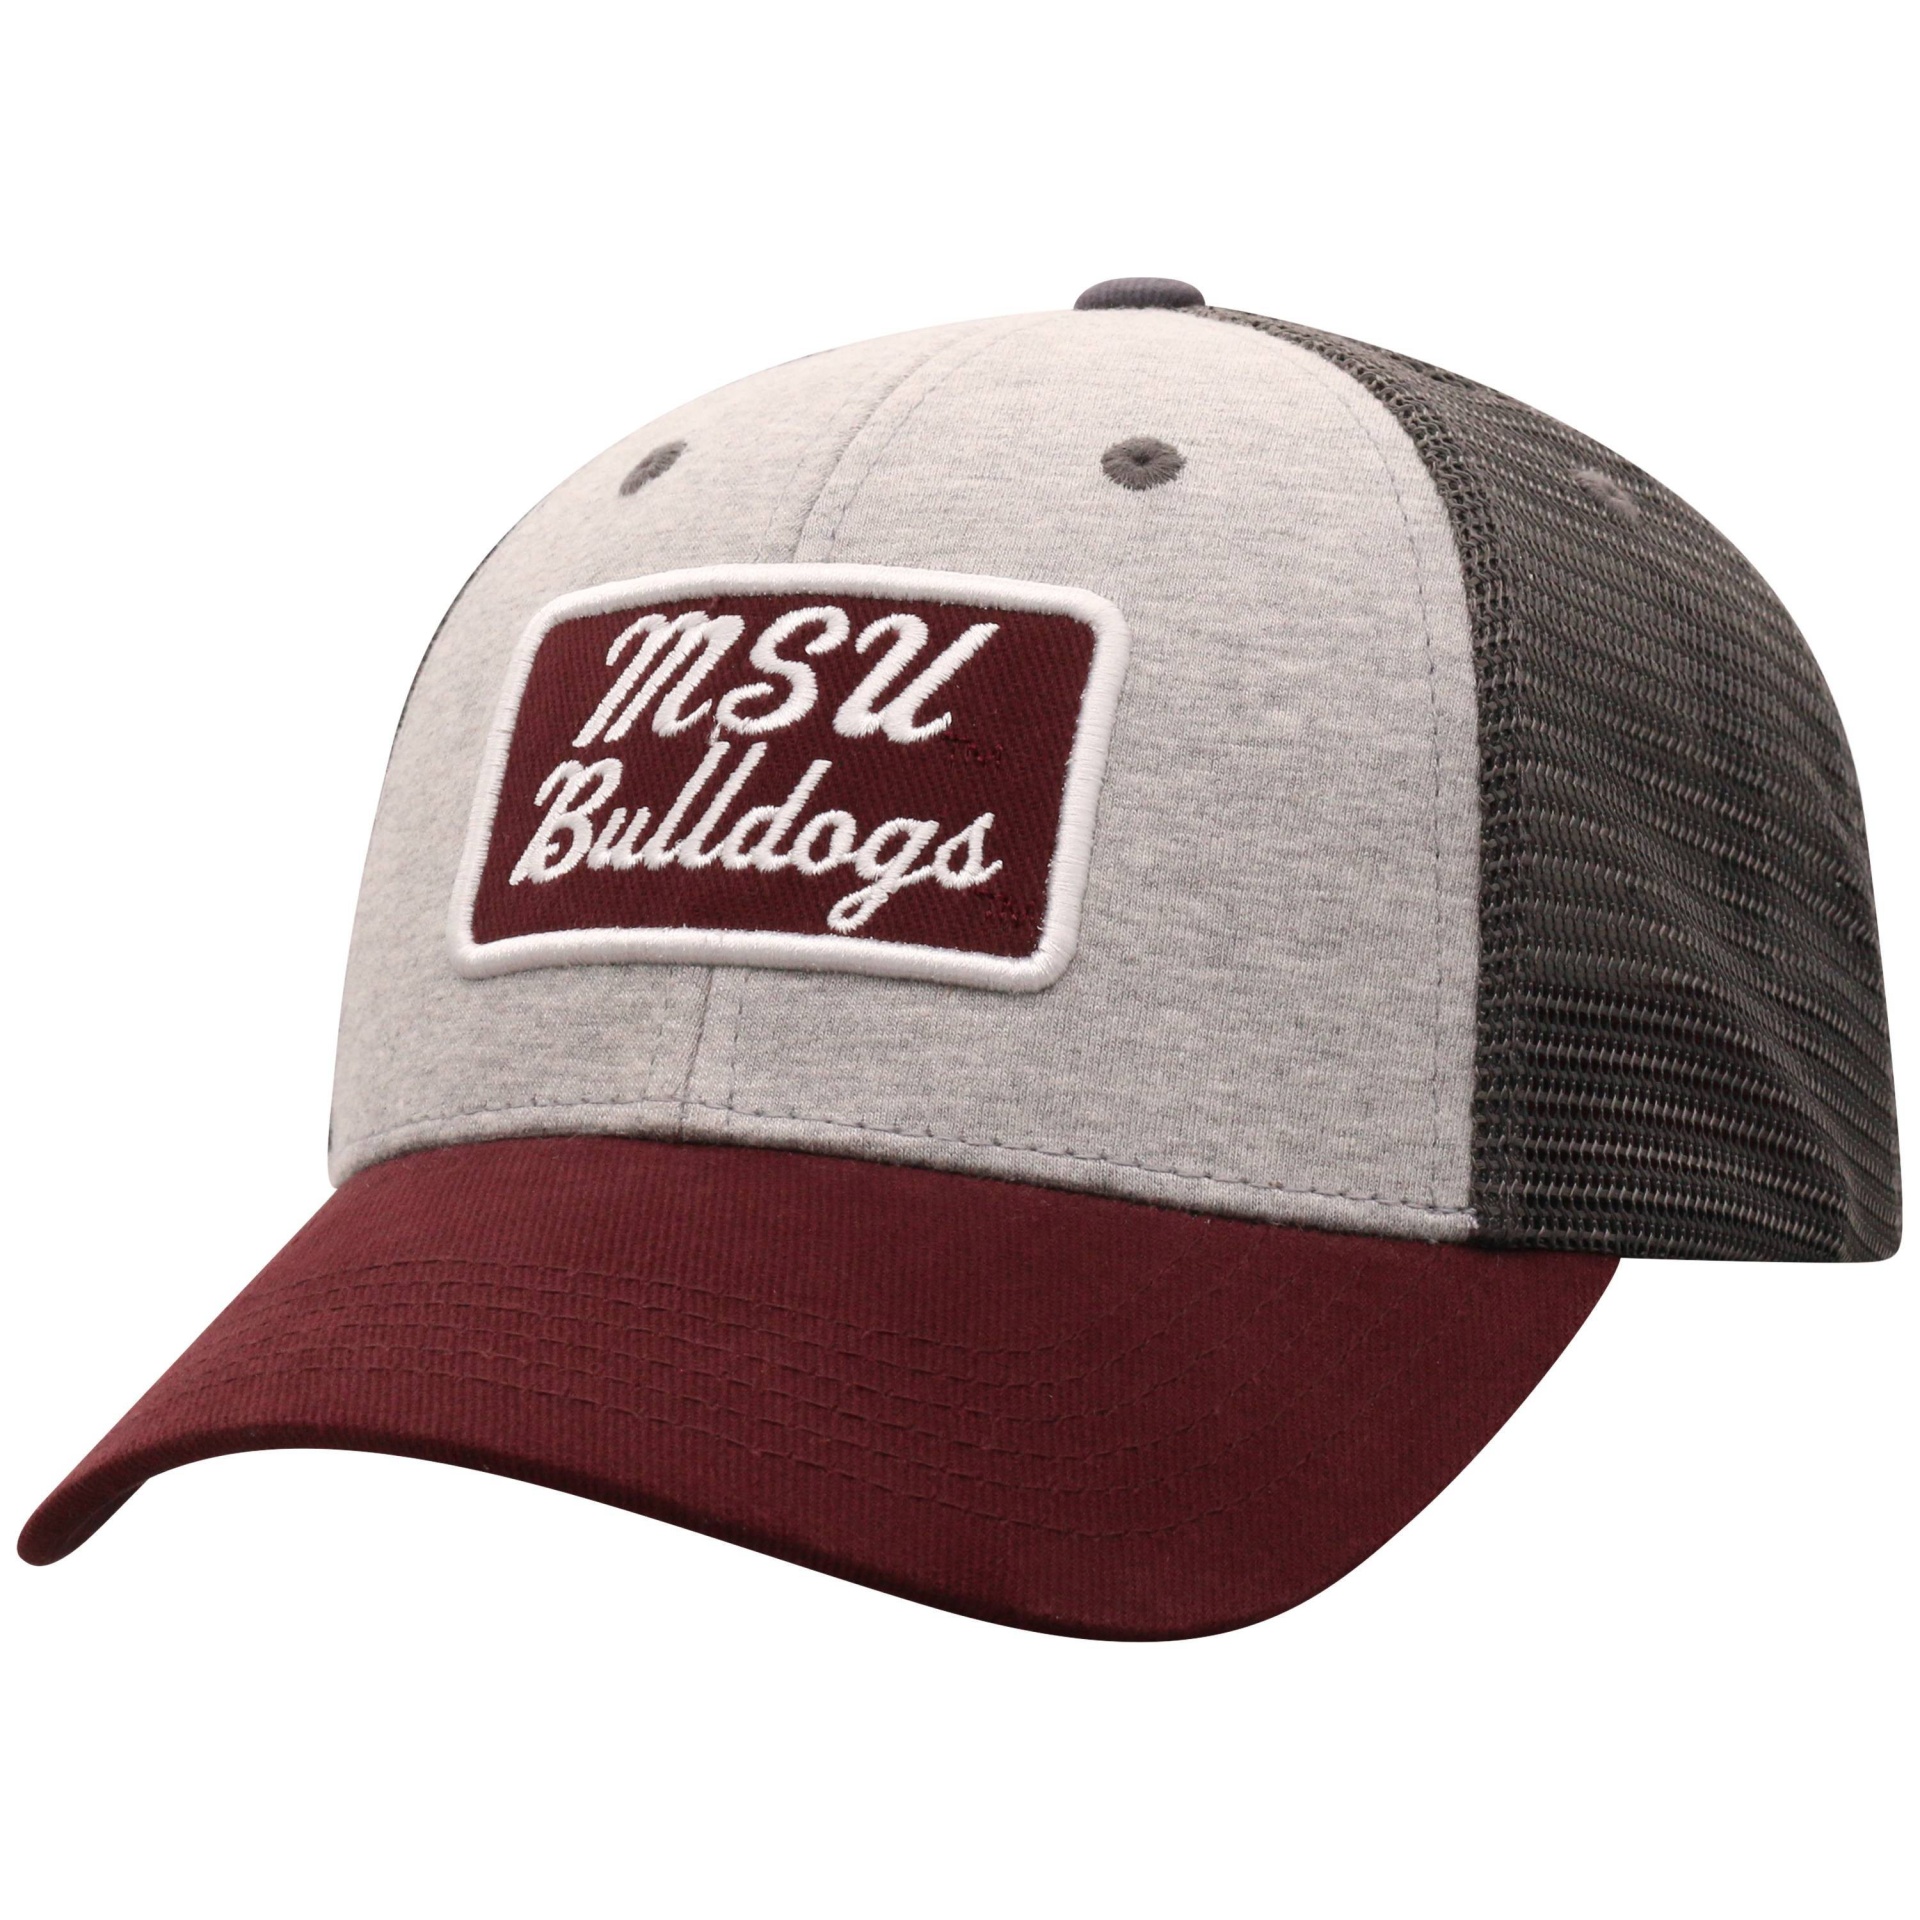 slide 1 of 2, NCAA Mississippi State Bulldogs Men's Gray Cotton with Mesh Snapback Hat, 1 ct